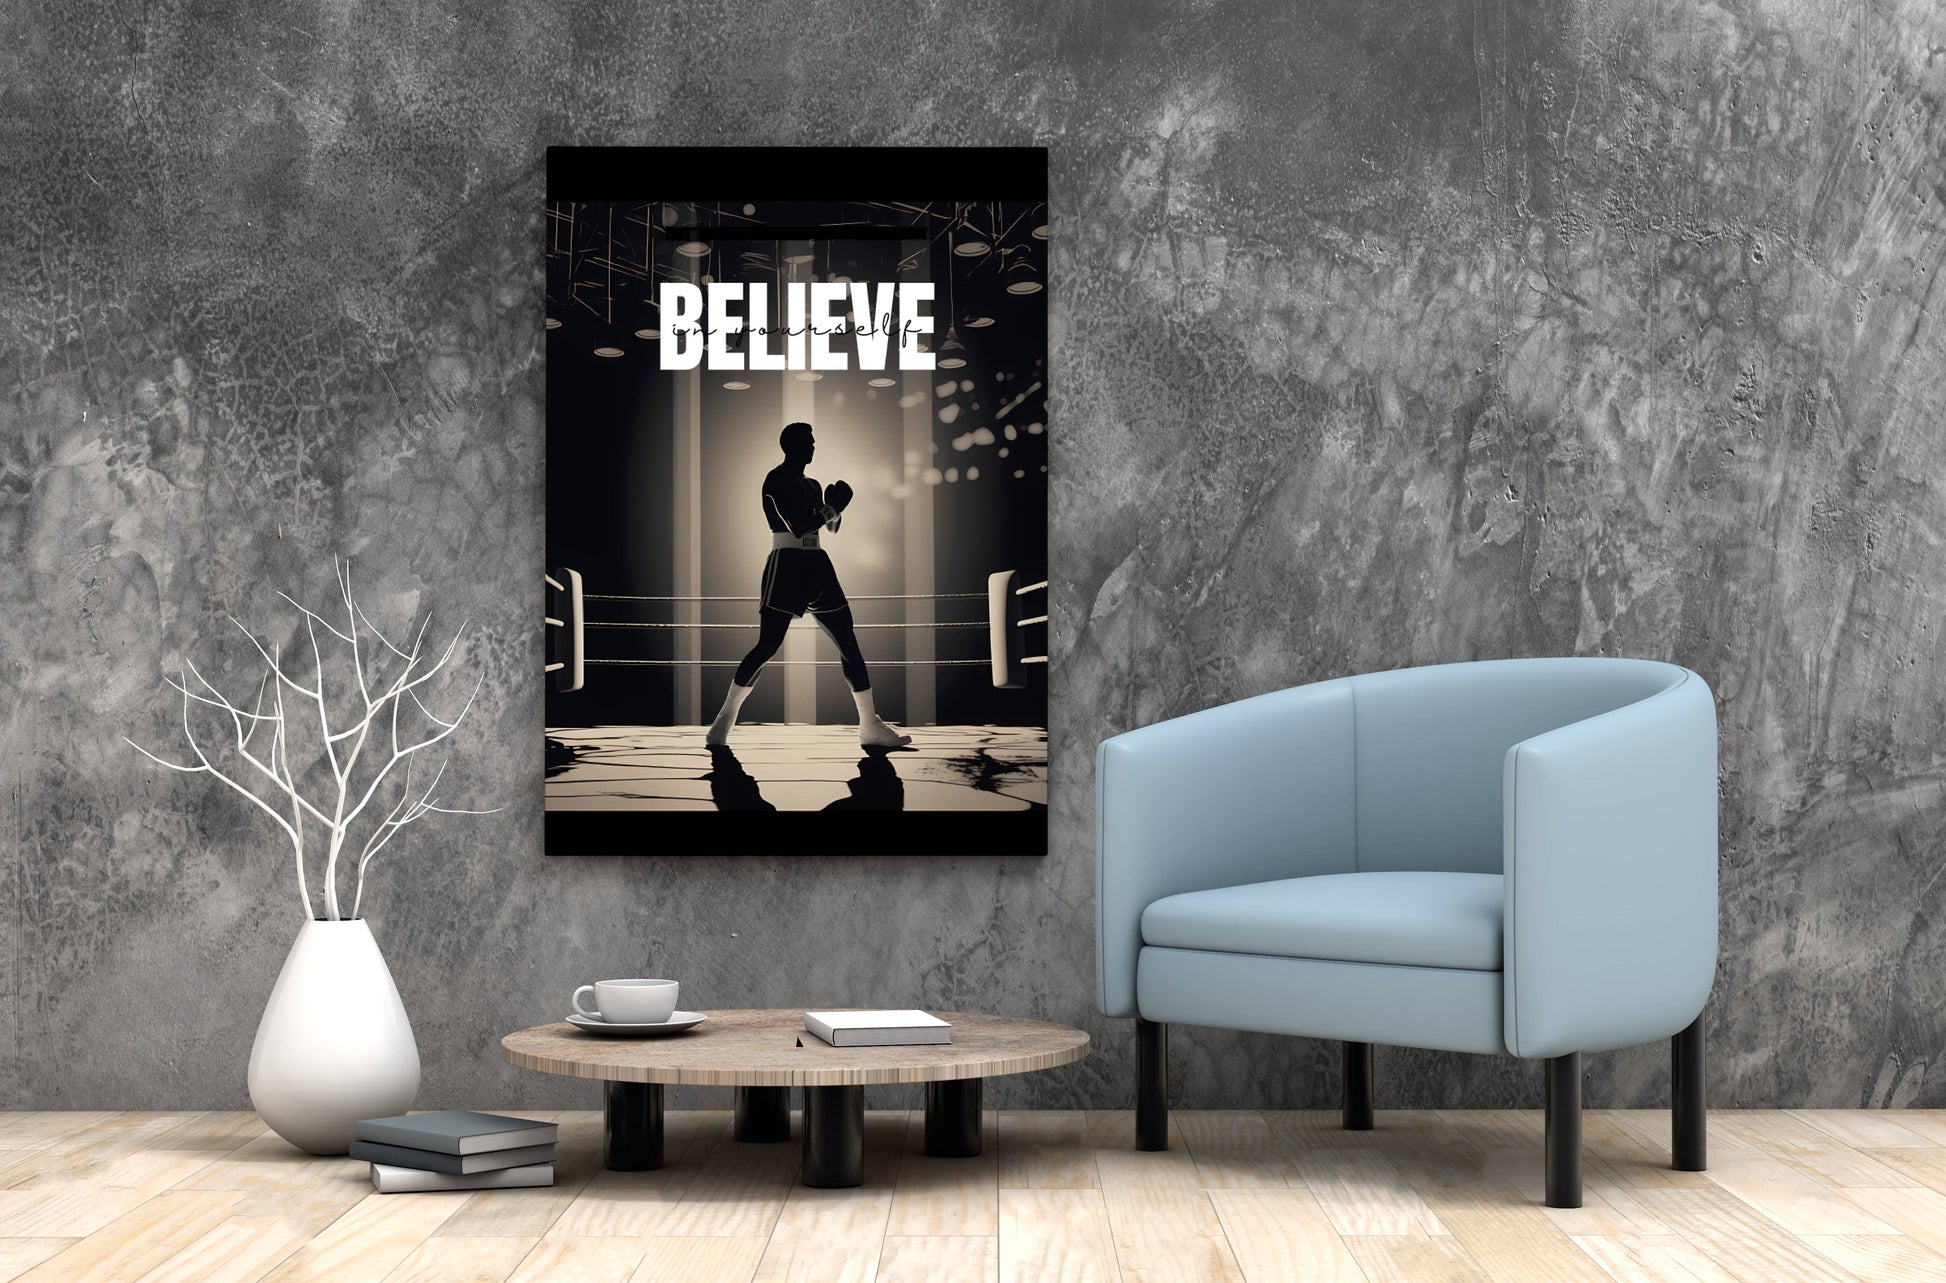 Empowered by Ali Motivational Wall Art of Muhammad Ali - Front angle 1